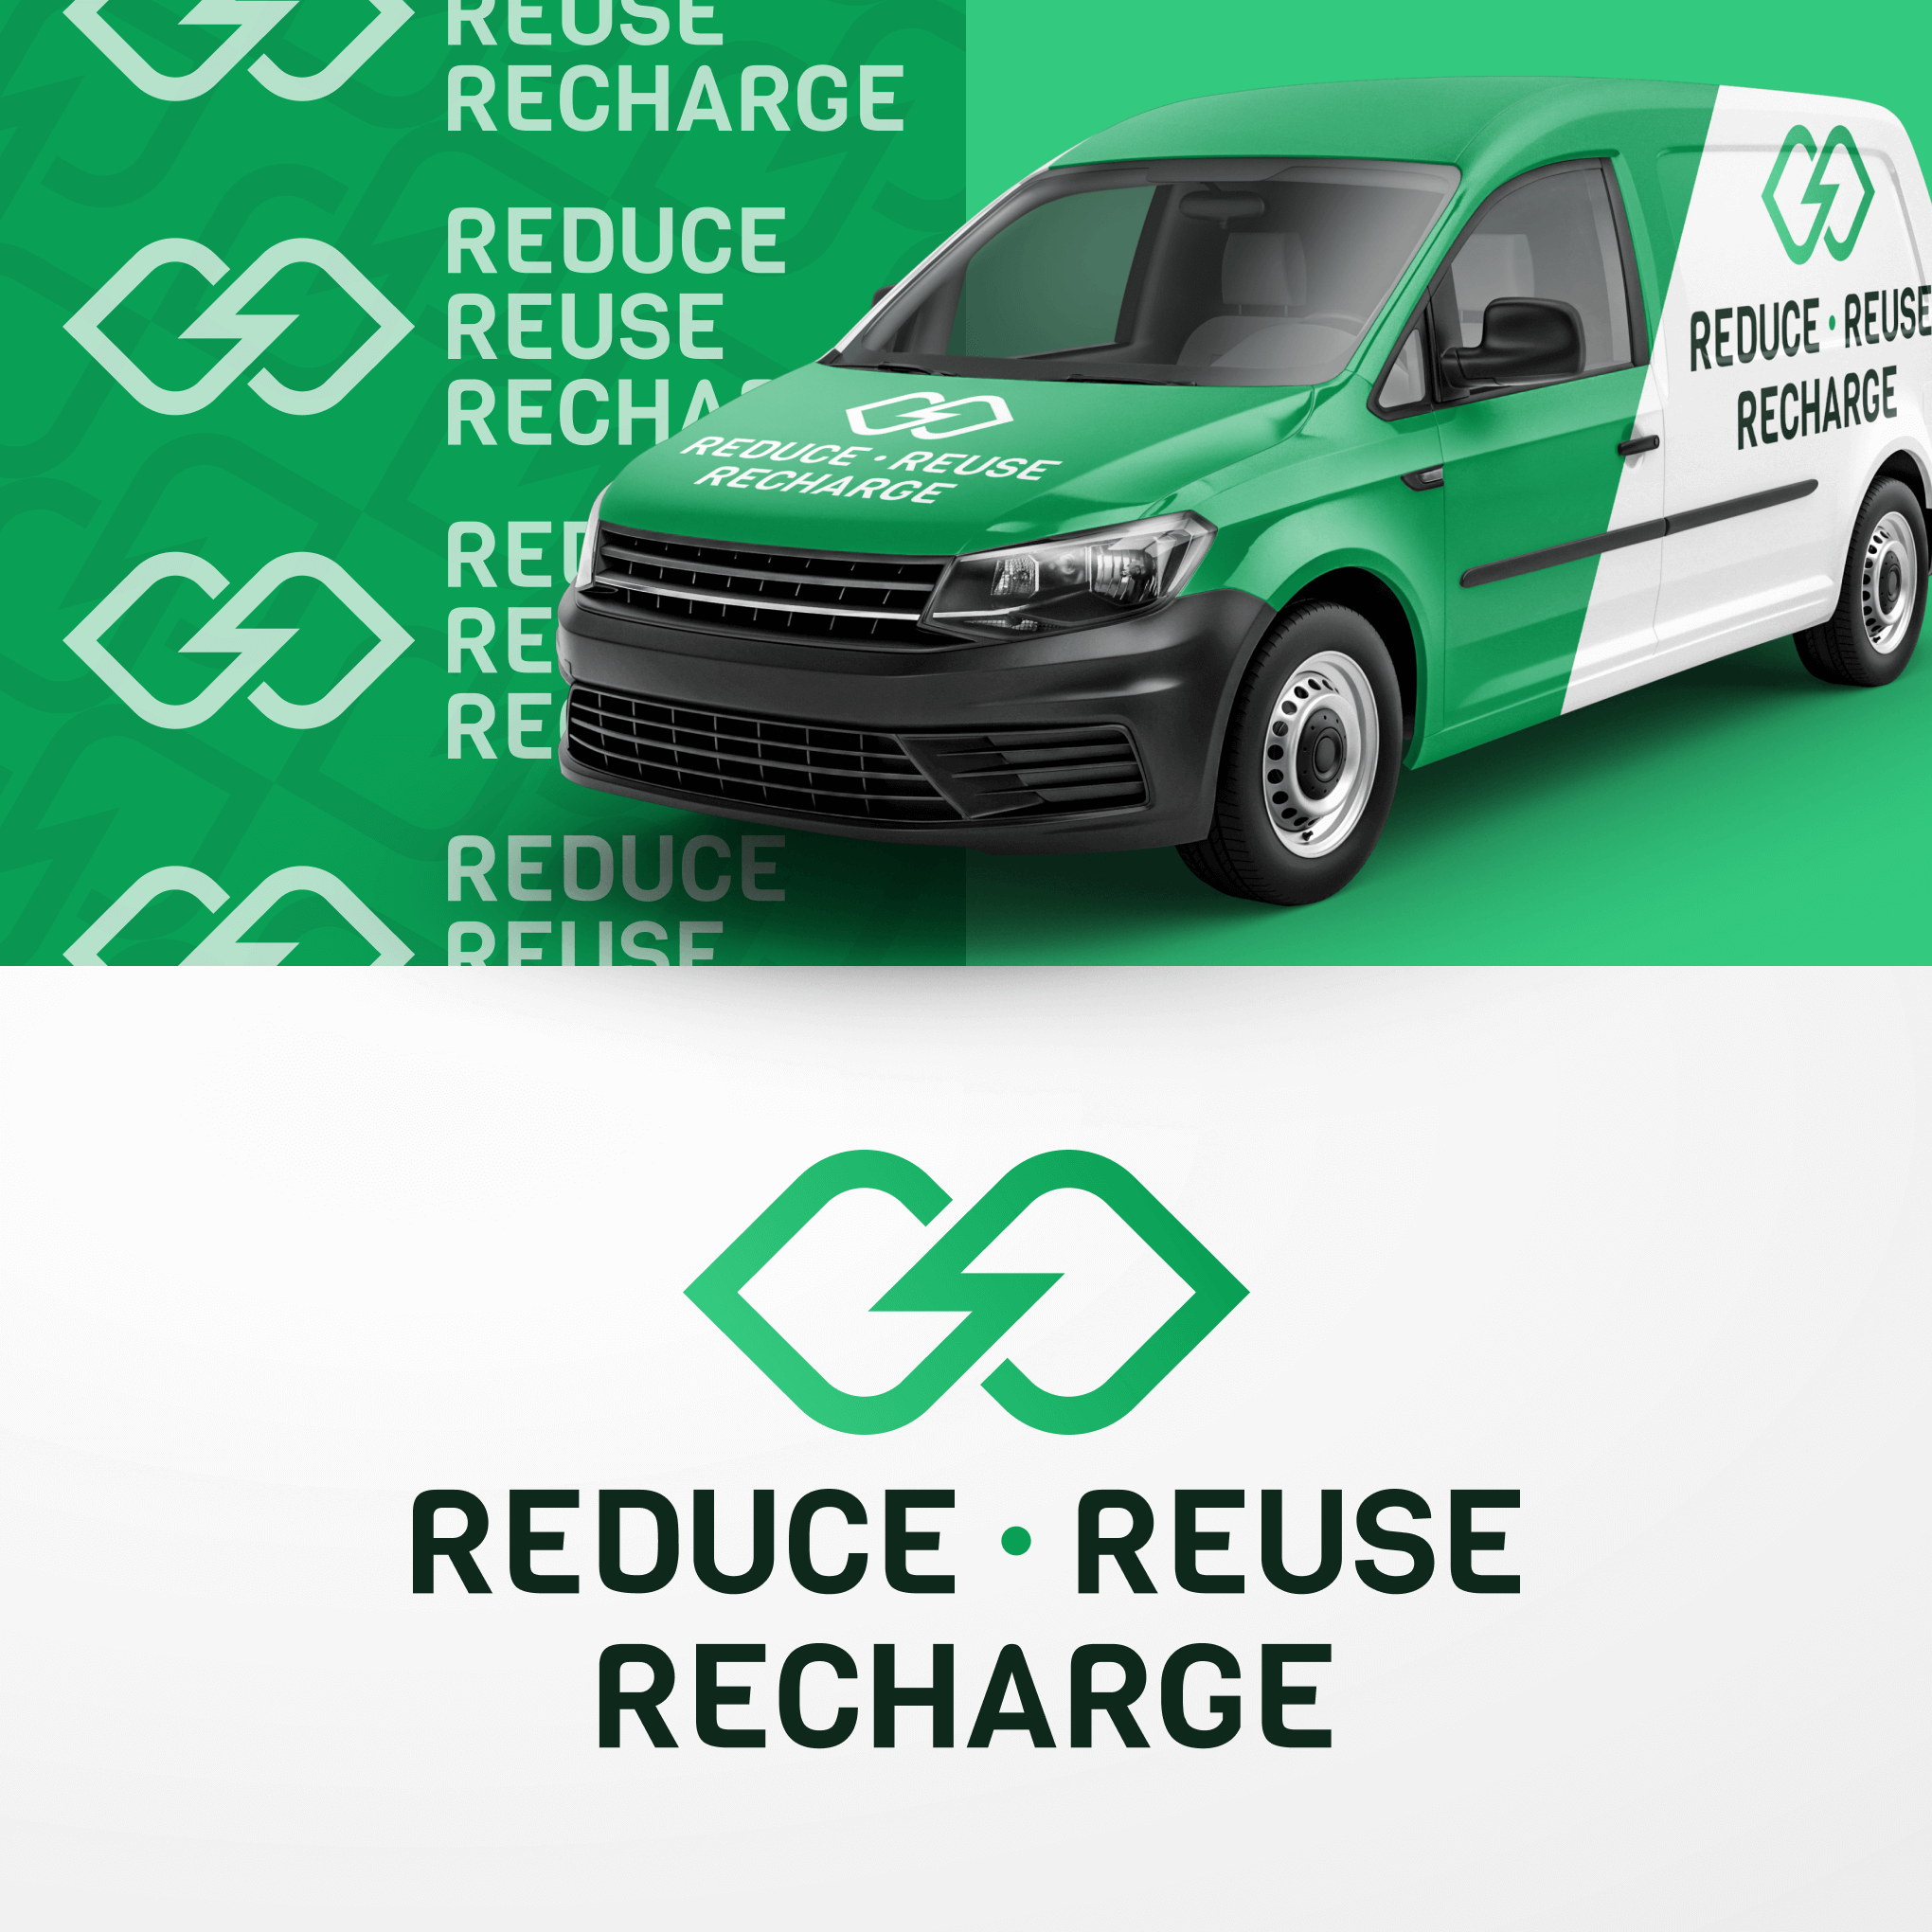 Reduce, Reuse, Recharge logo. It features the infinity symbol with an electric bolt integrated into it and is displayed as a van wrap graphic